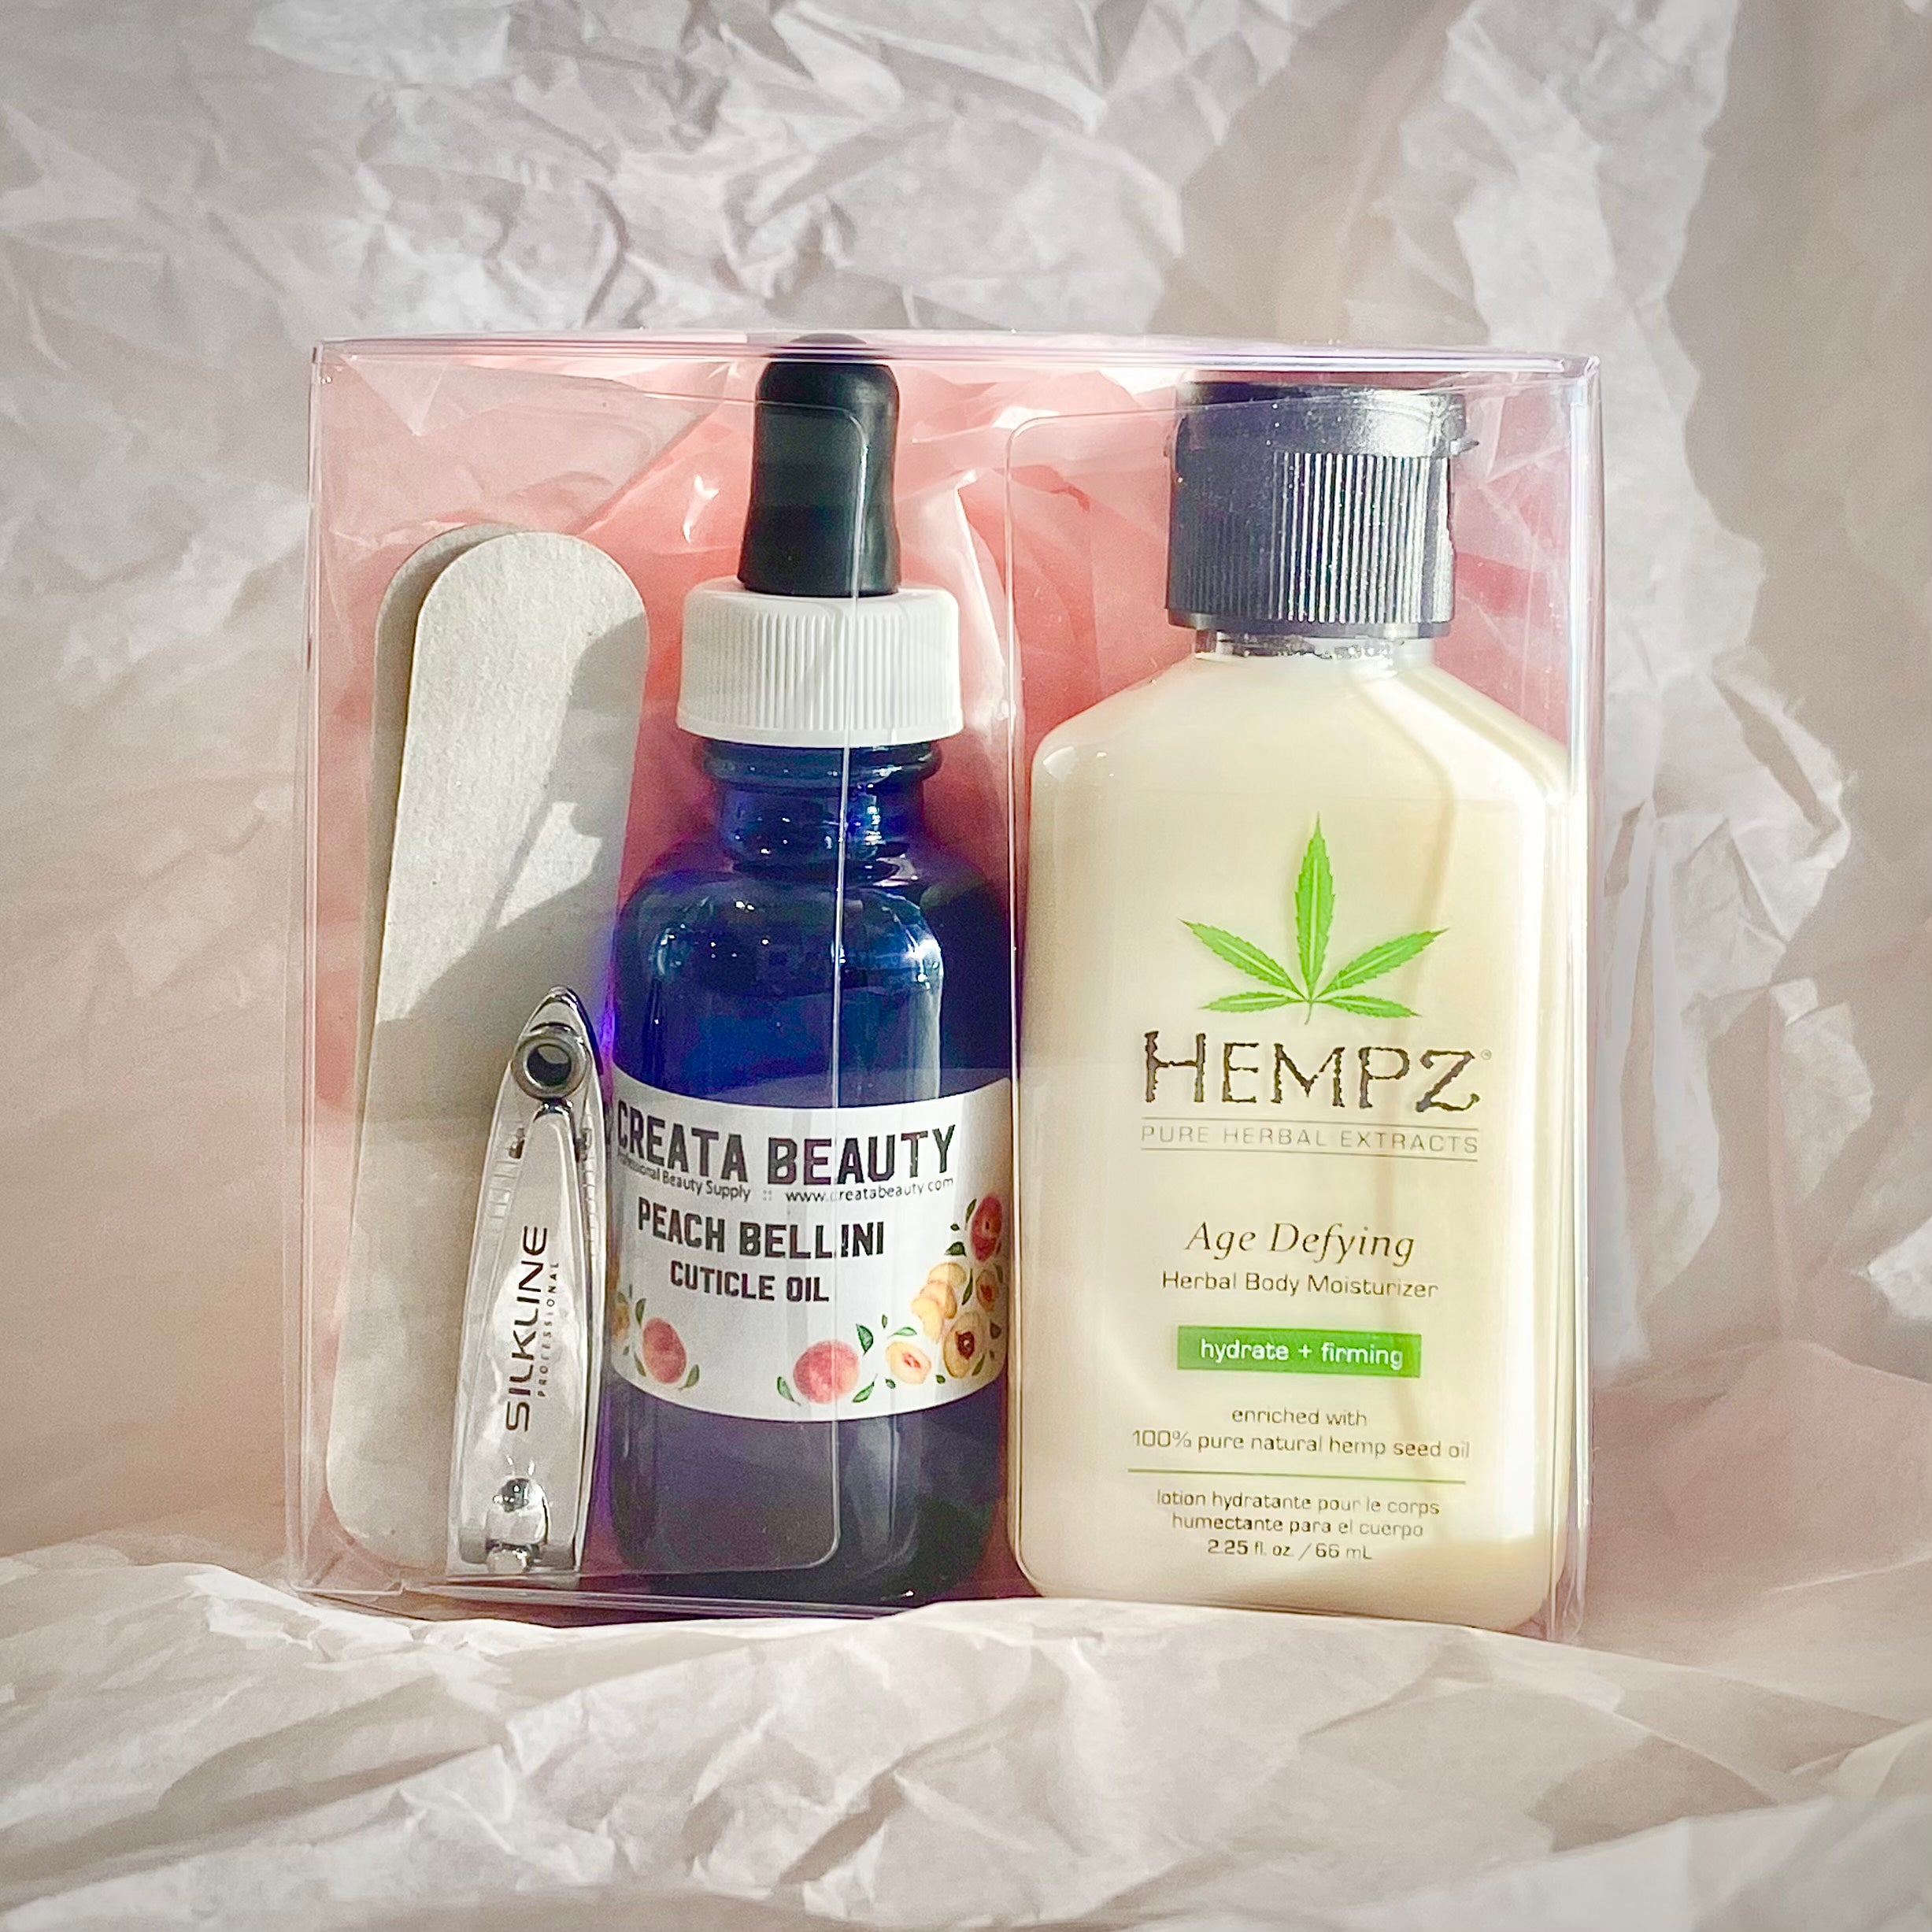 Creata Beauty Client Gift Pack - Hand Pack - "Nailed It" - Creata Beauty - Professional Beauty Products